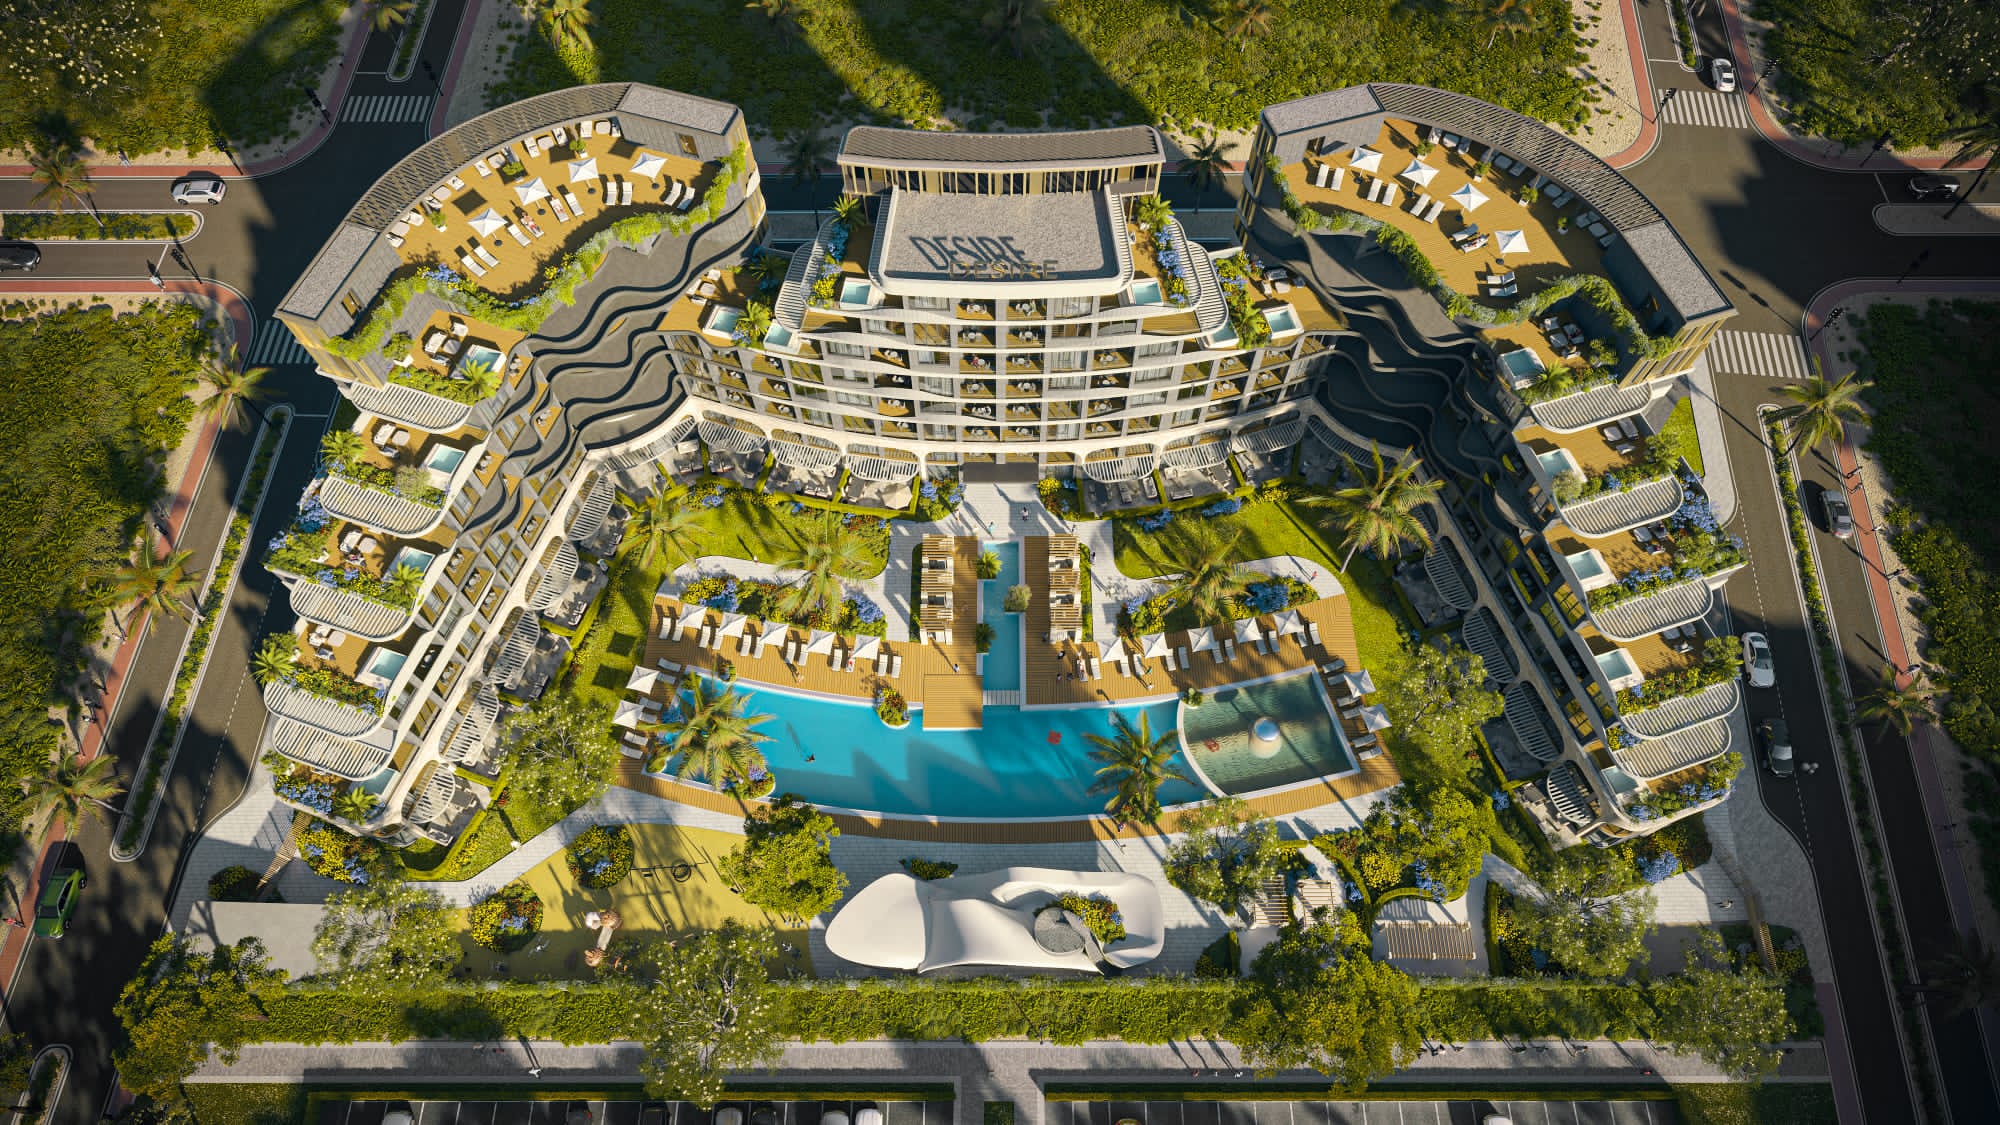 Apartments for sale under the Deluxe Design Antalya Premium Residance project in Altnash Antalya